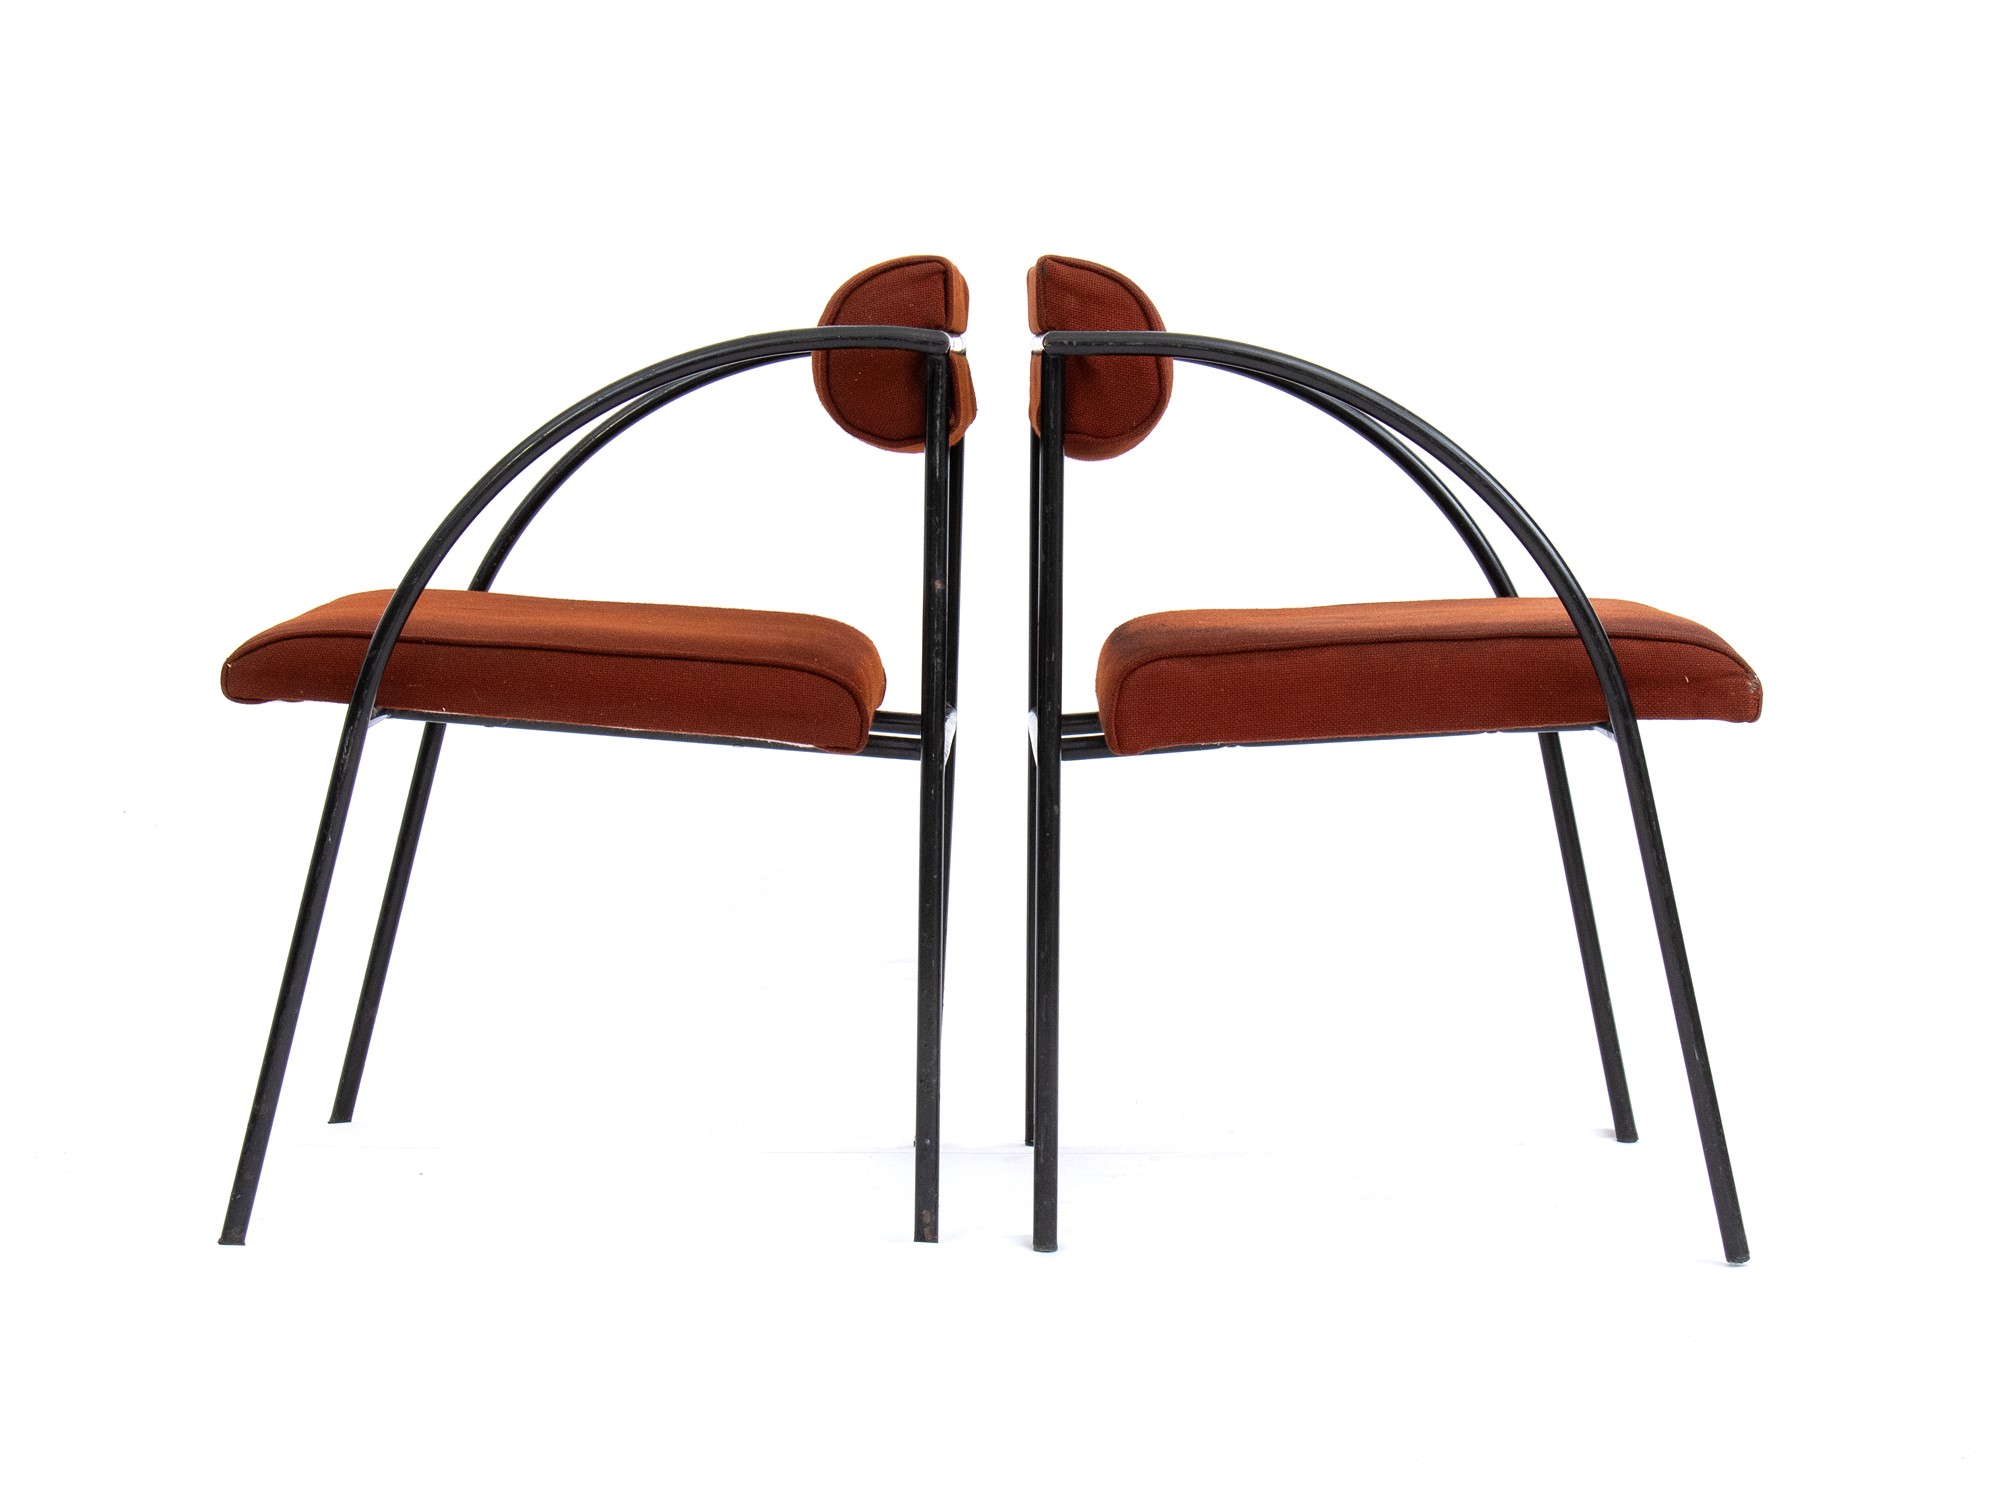 Rodney Kinsman Londra 1943 Set of two Wien chairs with round metal structure and curved armrests - Image 8 of 15